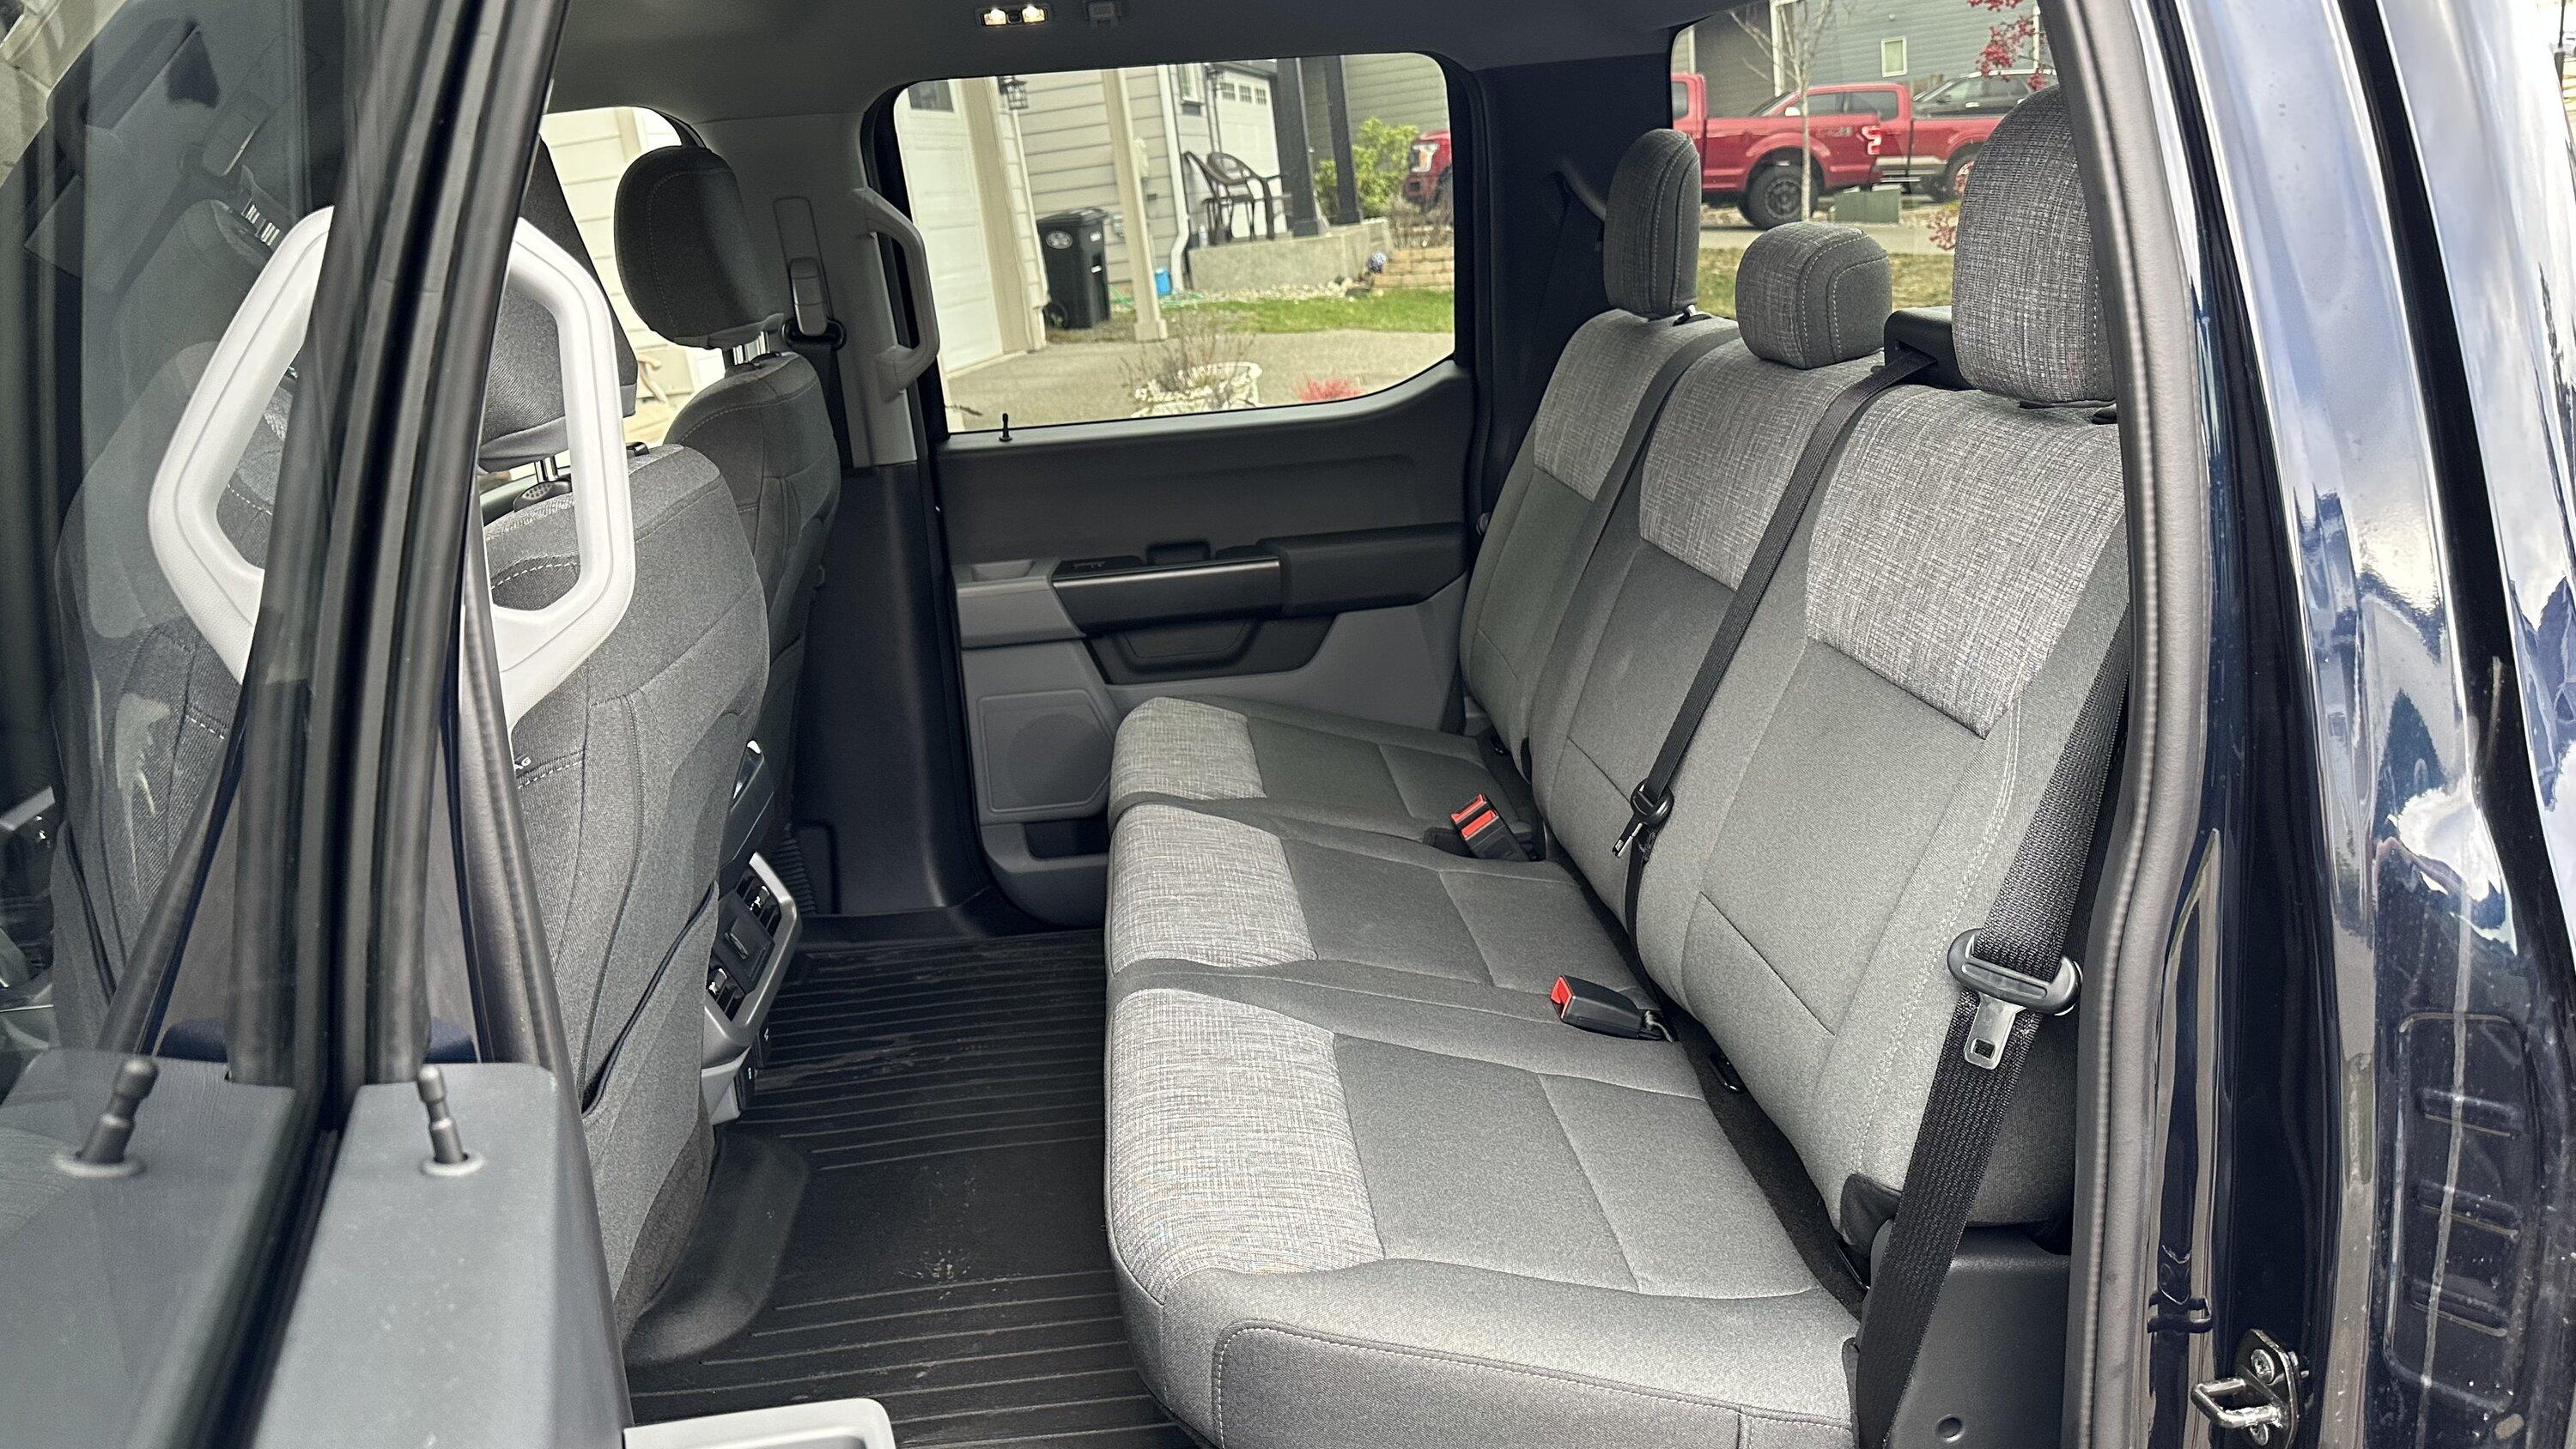 Ford F-150 Lightning Changed Pro Seats to XLT Seats by changing OEM seat covers IMG-5725